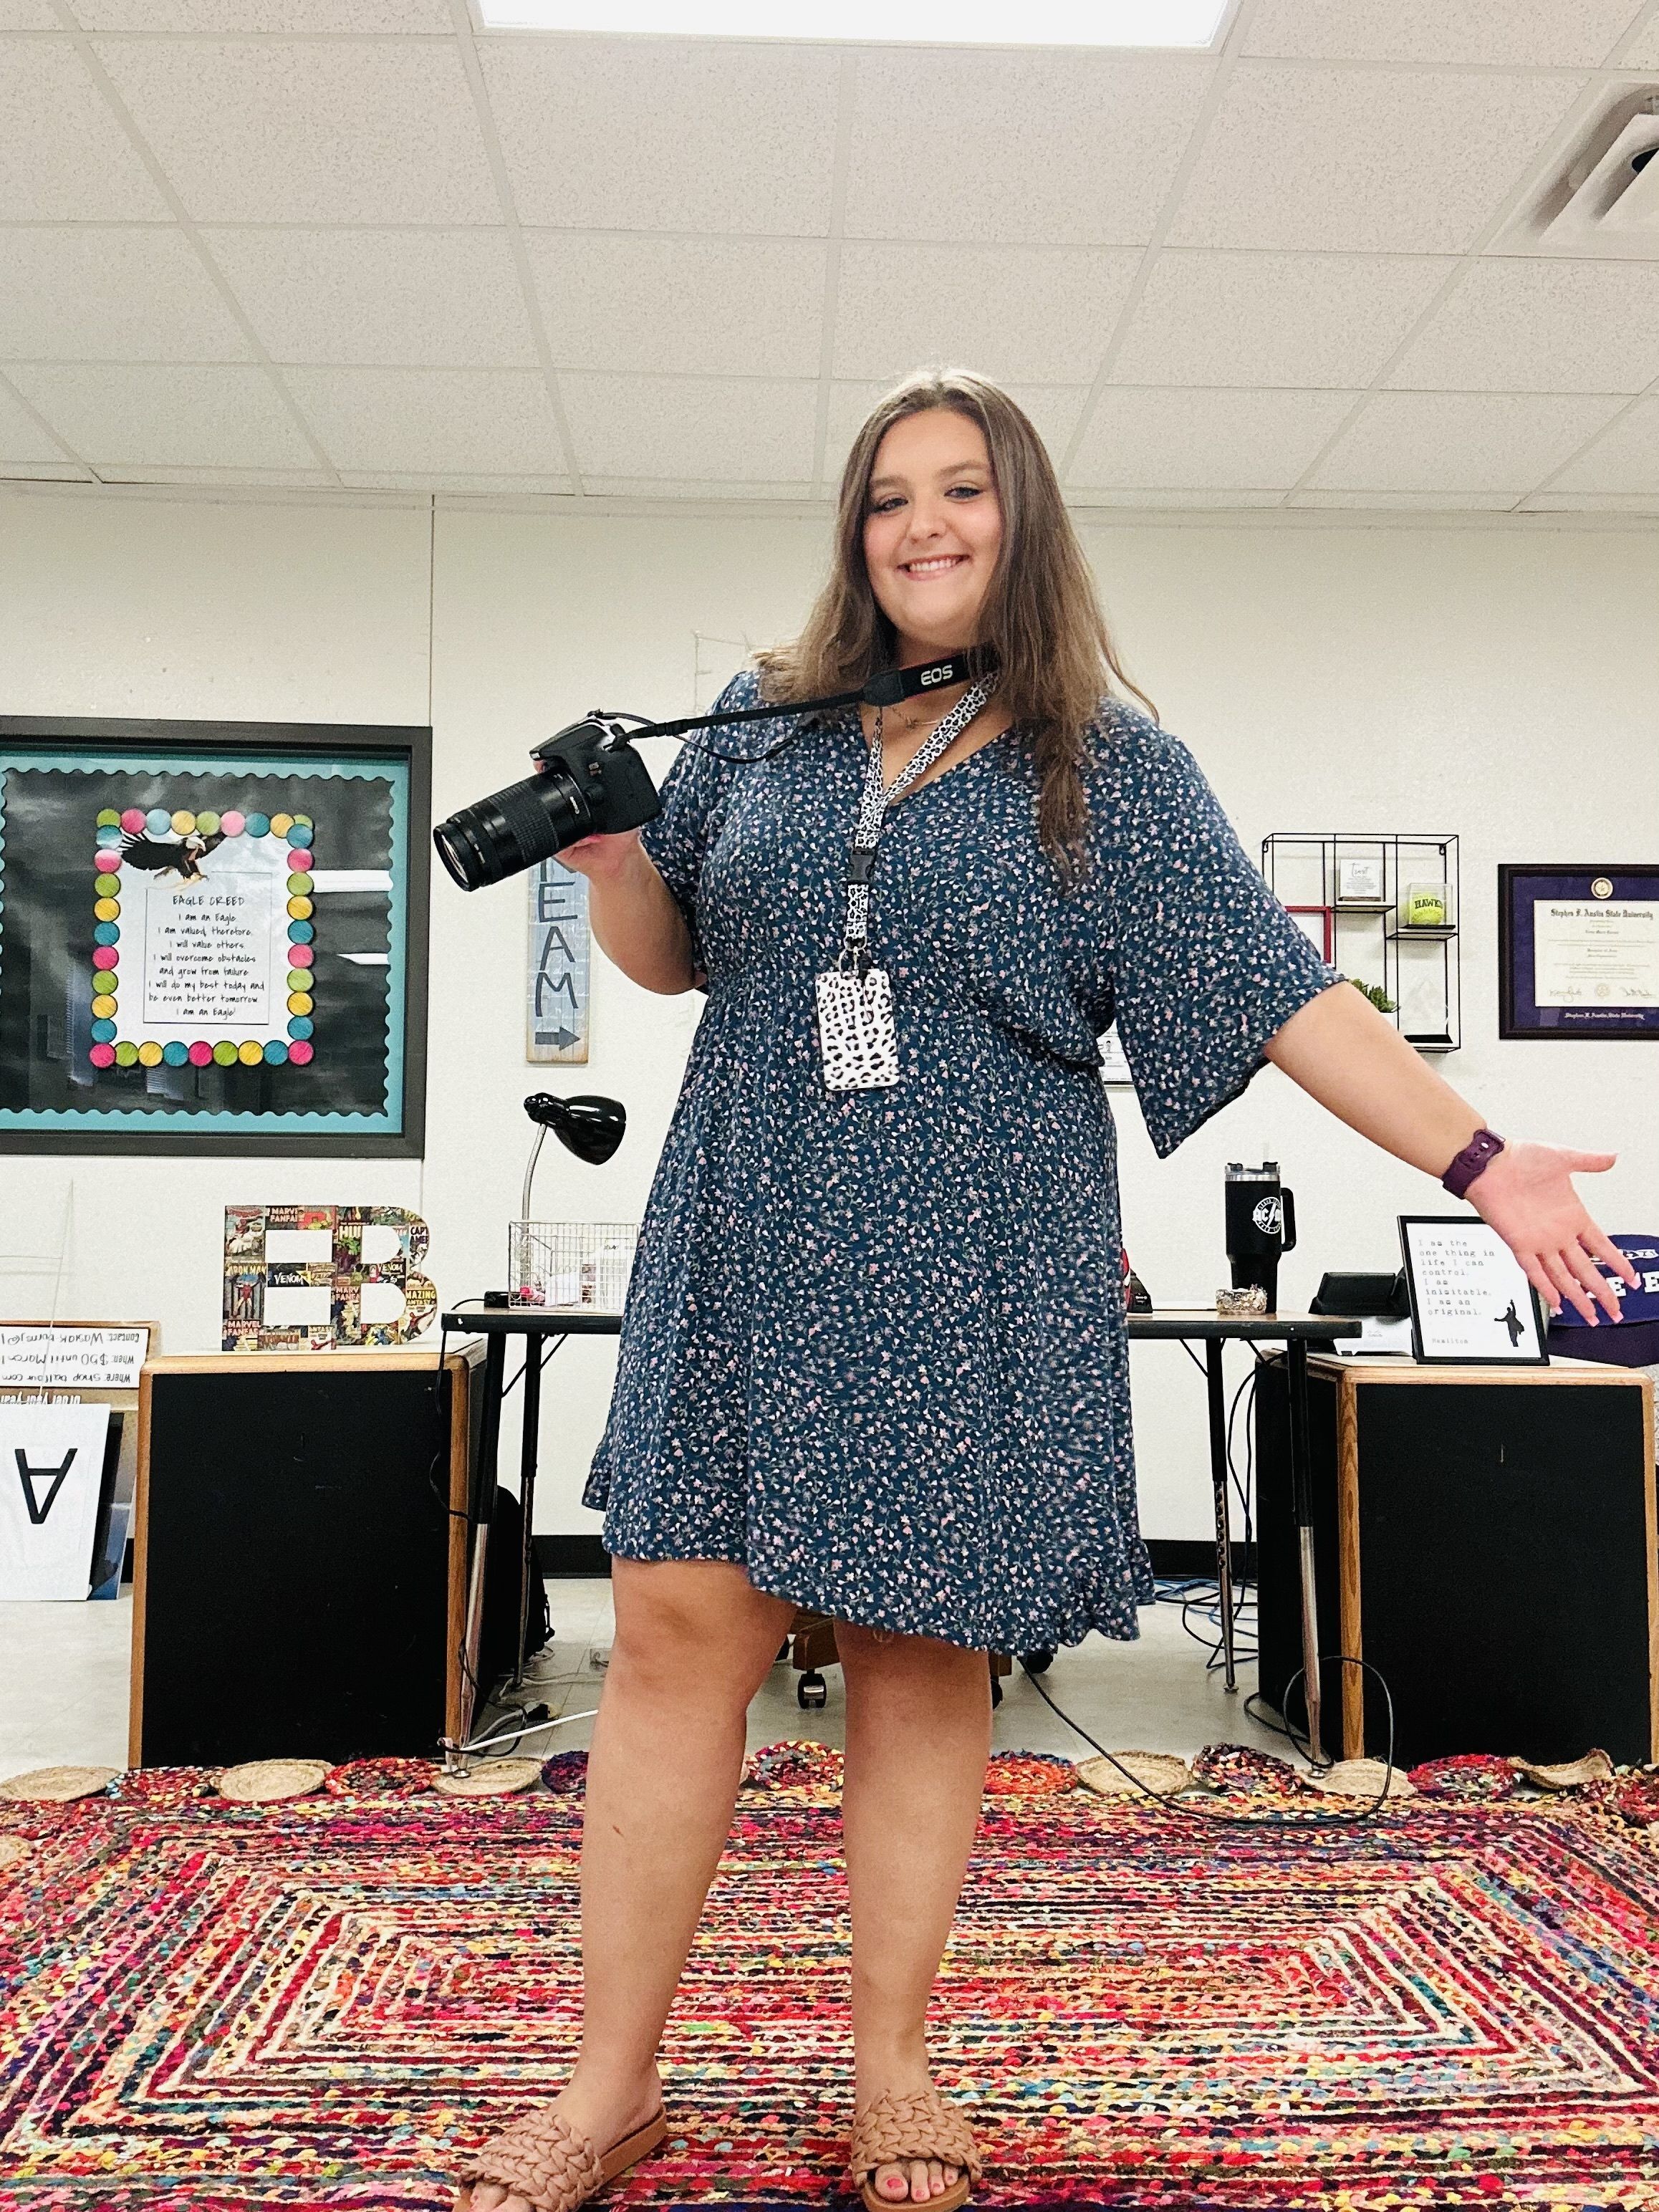 Former Hebron Student Starts First Year Teaching at Arbor Creek